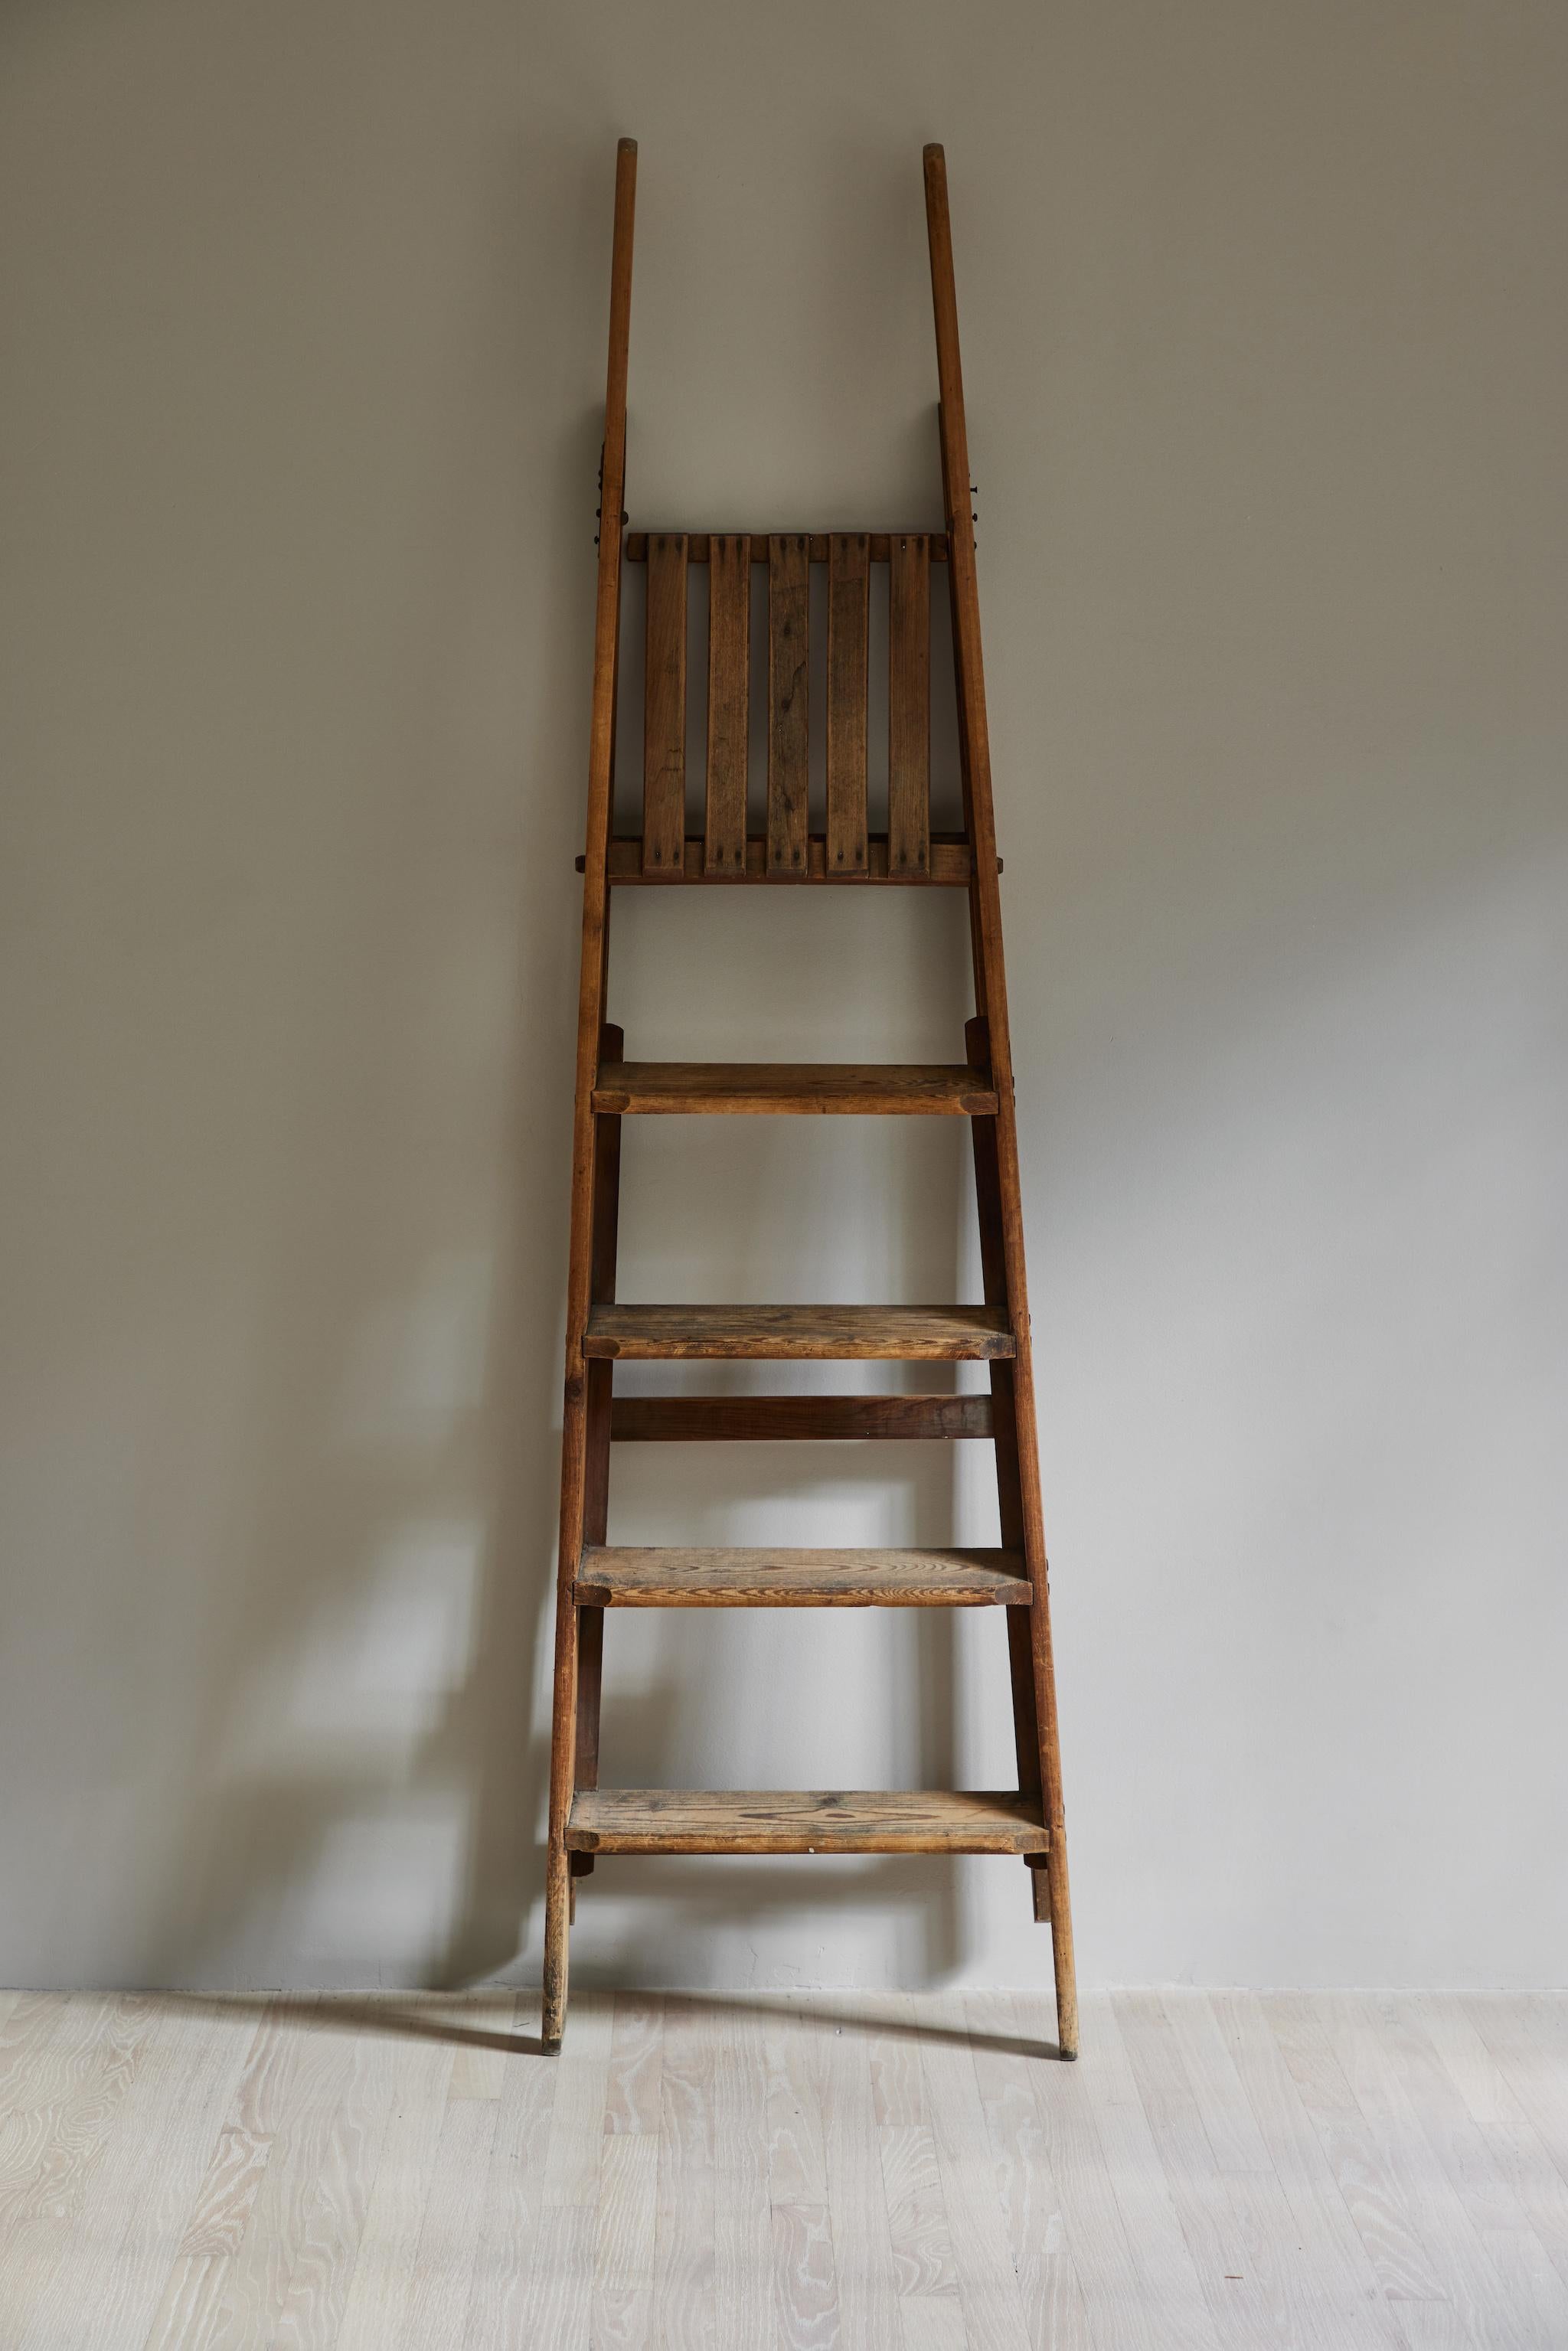 French Folding Wooden Library Ladder from Late 19th Century France